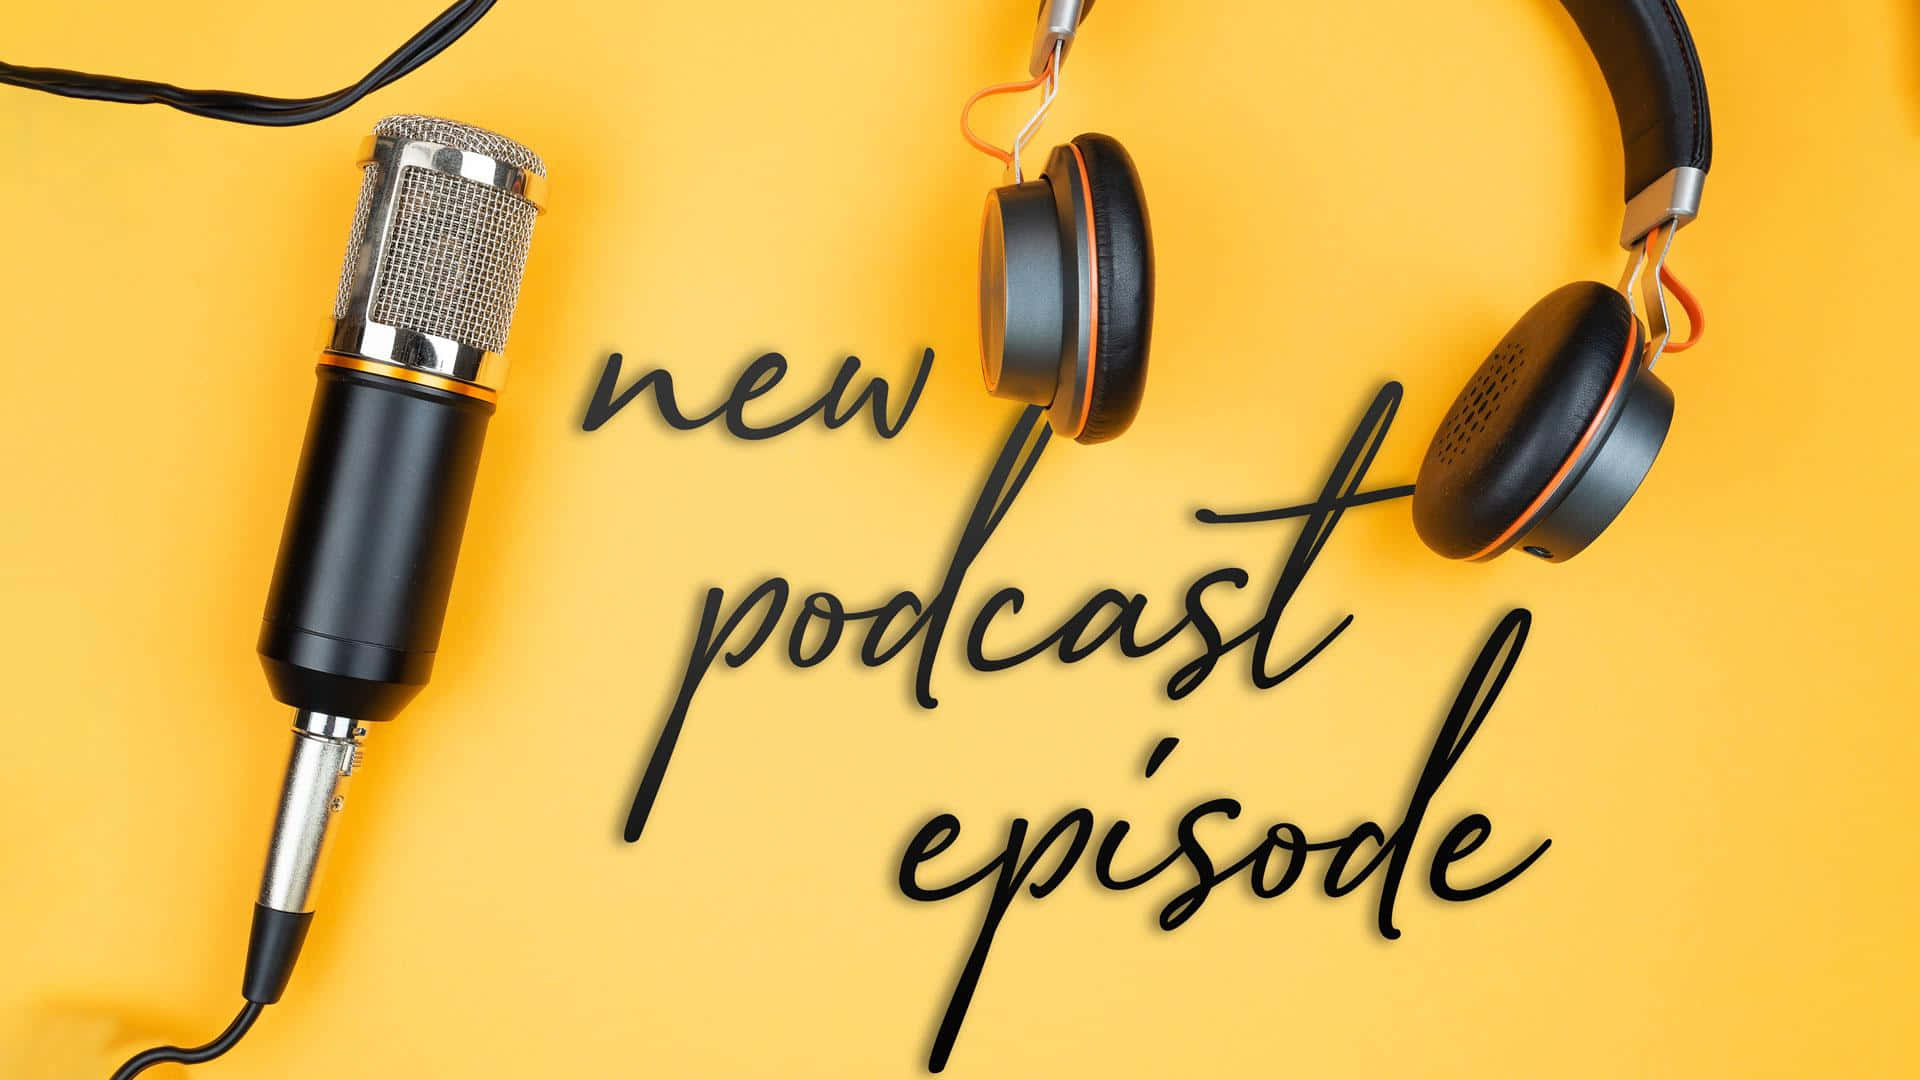 Landscape Podcast Microphone And Headphone Yellow Background